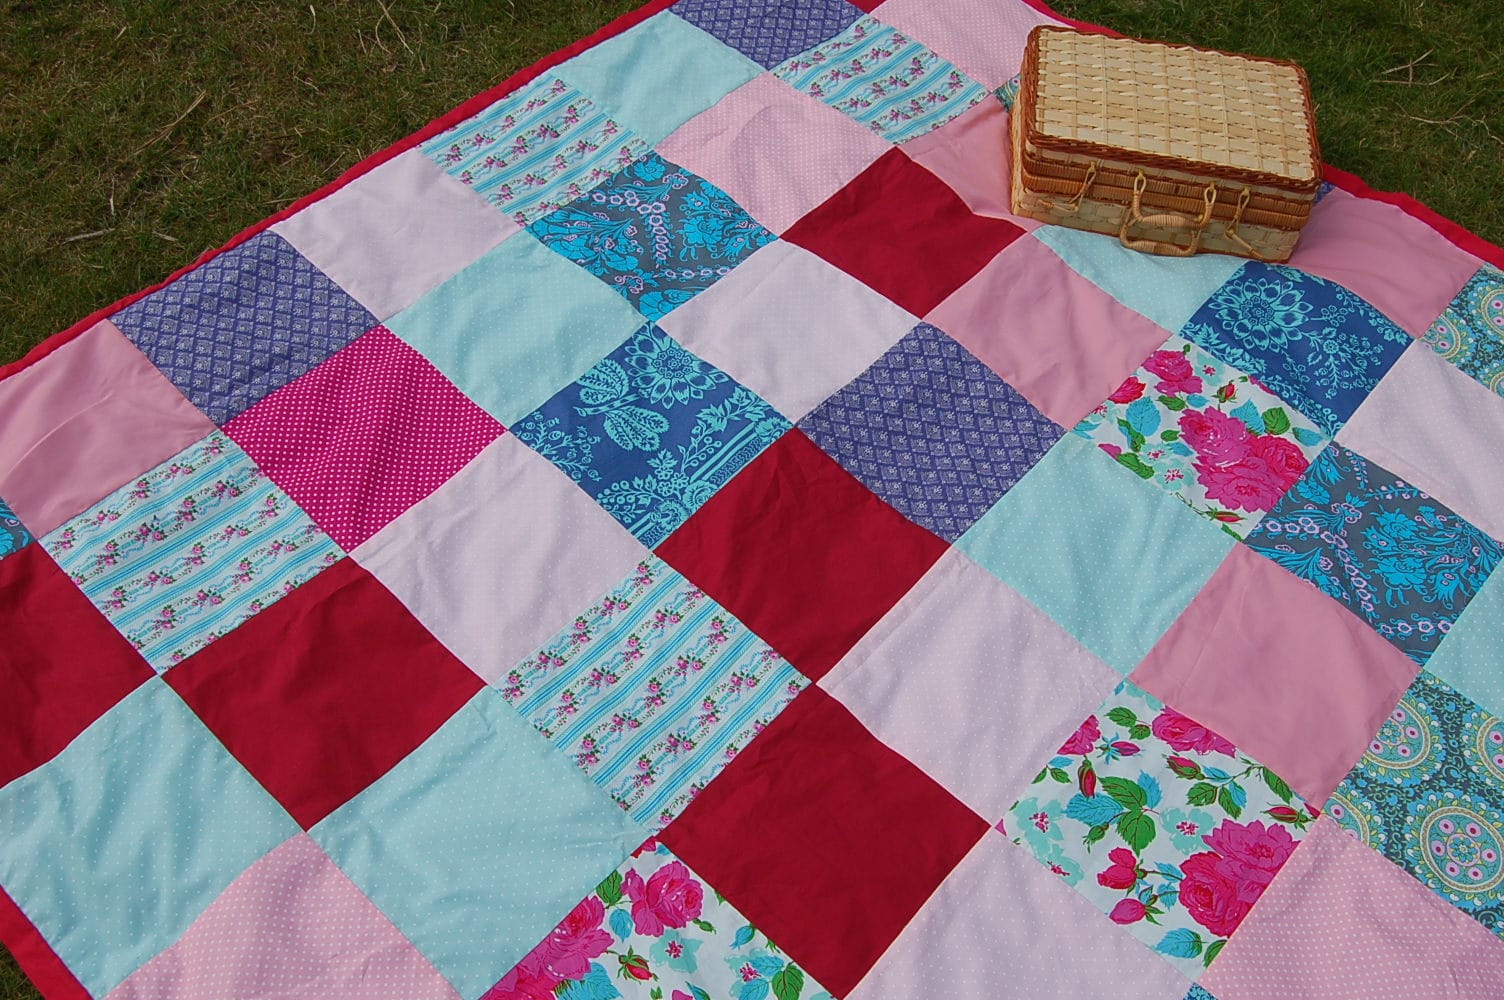 How To Clean A Picnic Blanket